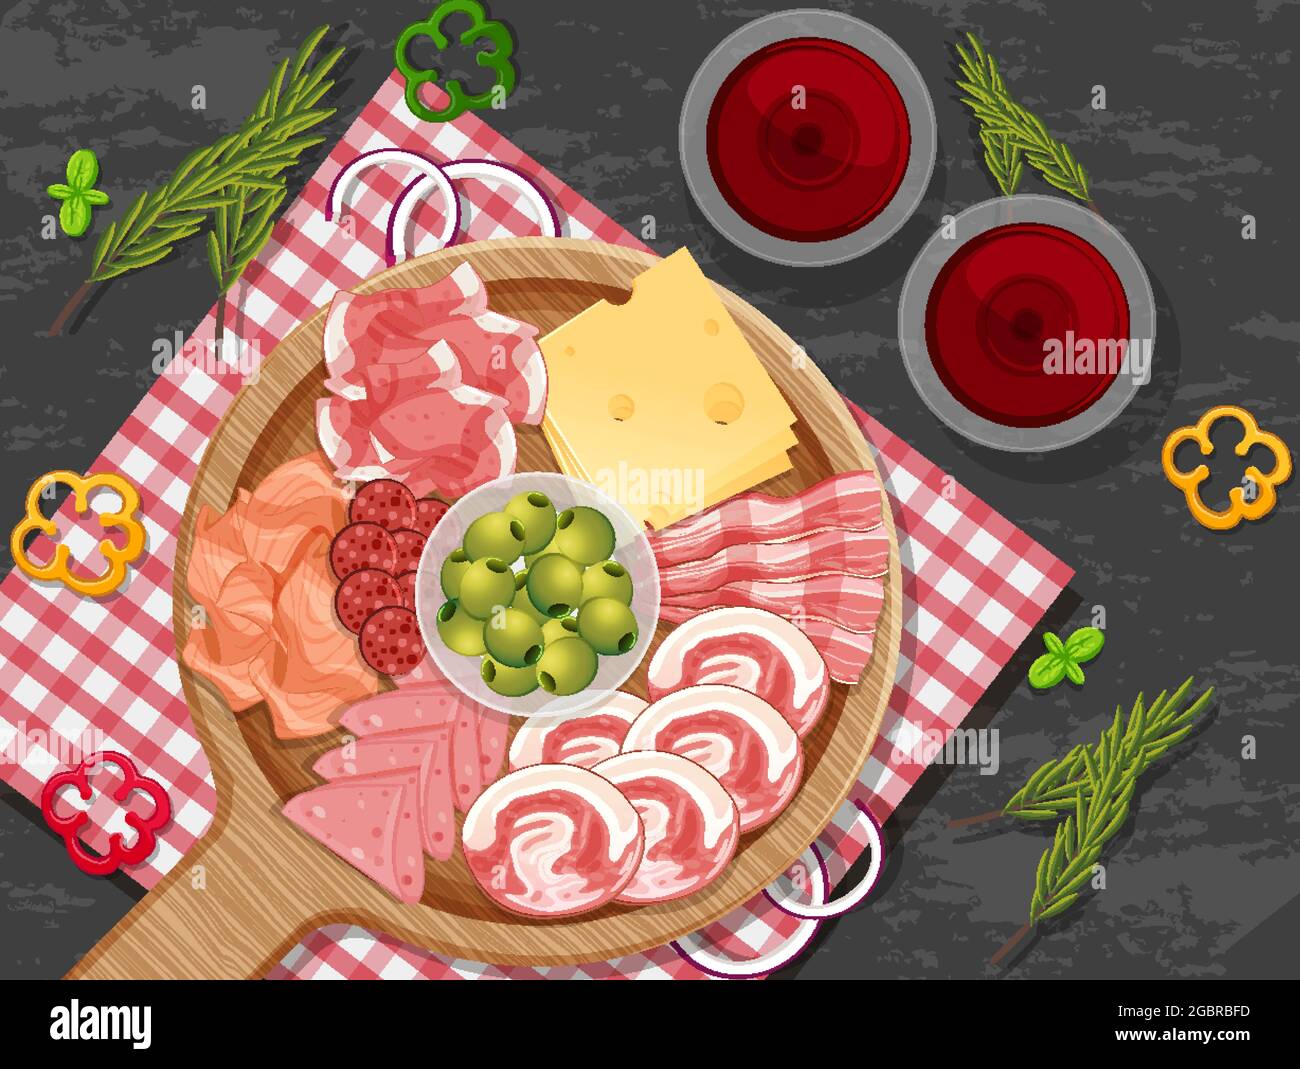 Platter of cold cuts and smoked meat on the table background illustration Stock Vector